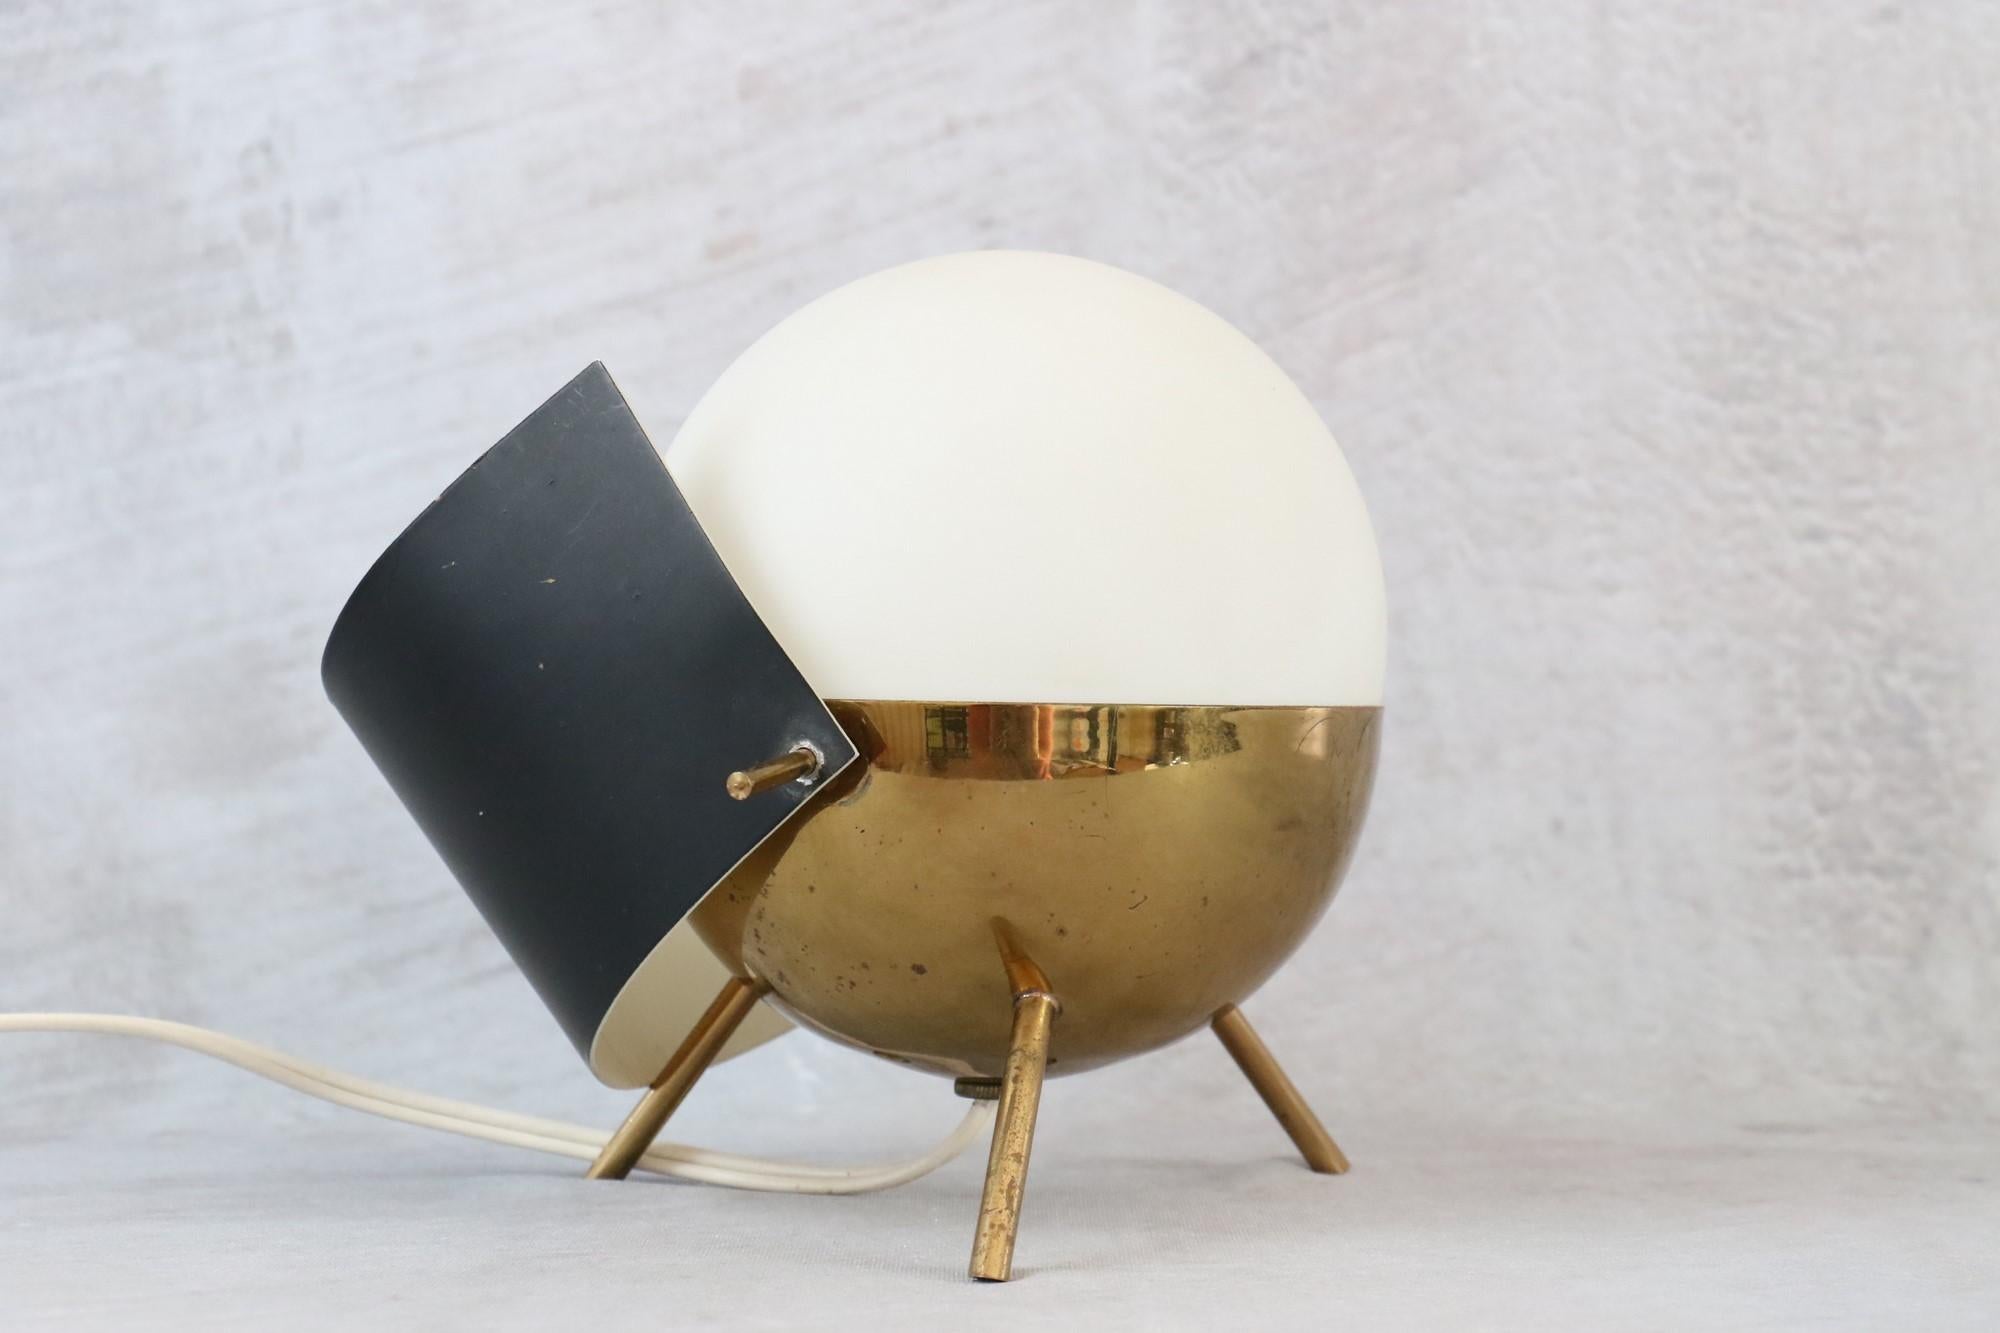 Rare 1950s Stilux Milano brass and opaline glass tripod table lamp

Stilux Milano tripod table lamp in gilded brass and opaline from the 1950s. 
It is characteristic of the highly refined aesthetic of mid-century Italian lighting design, embodied